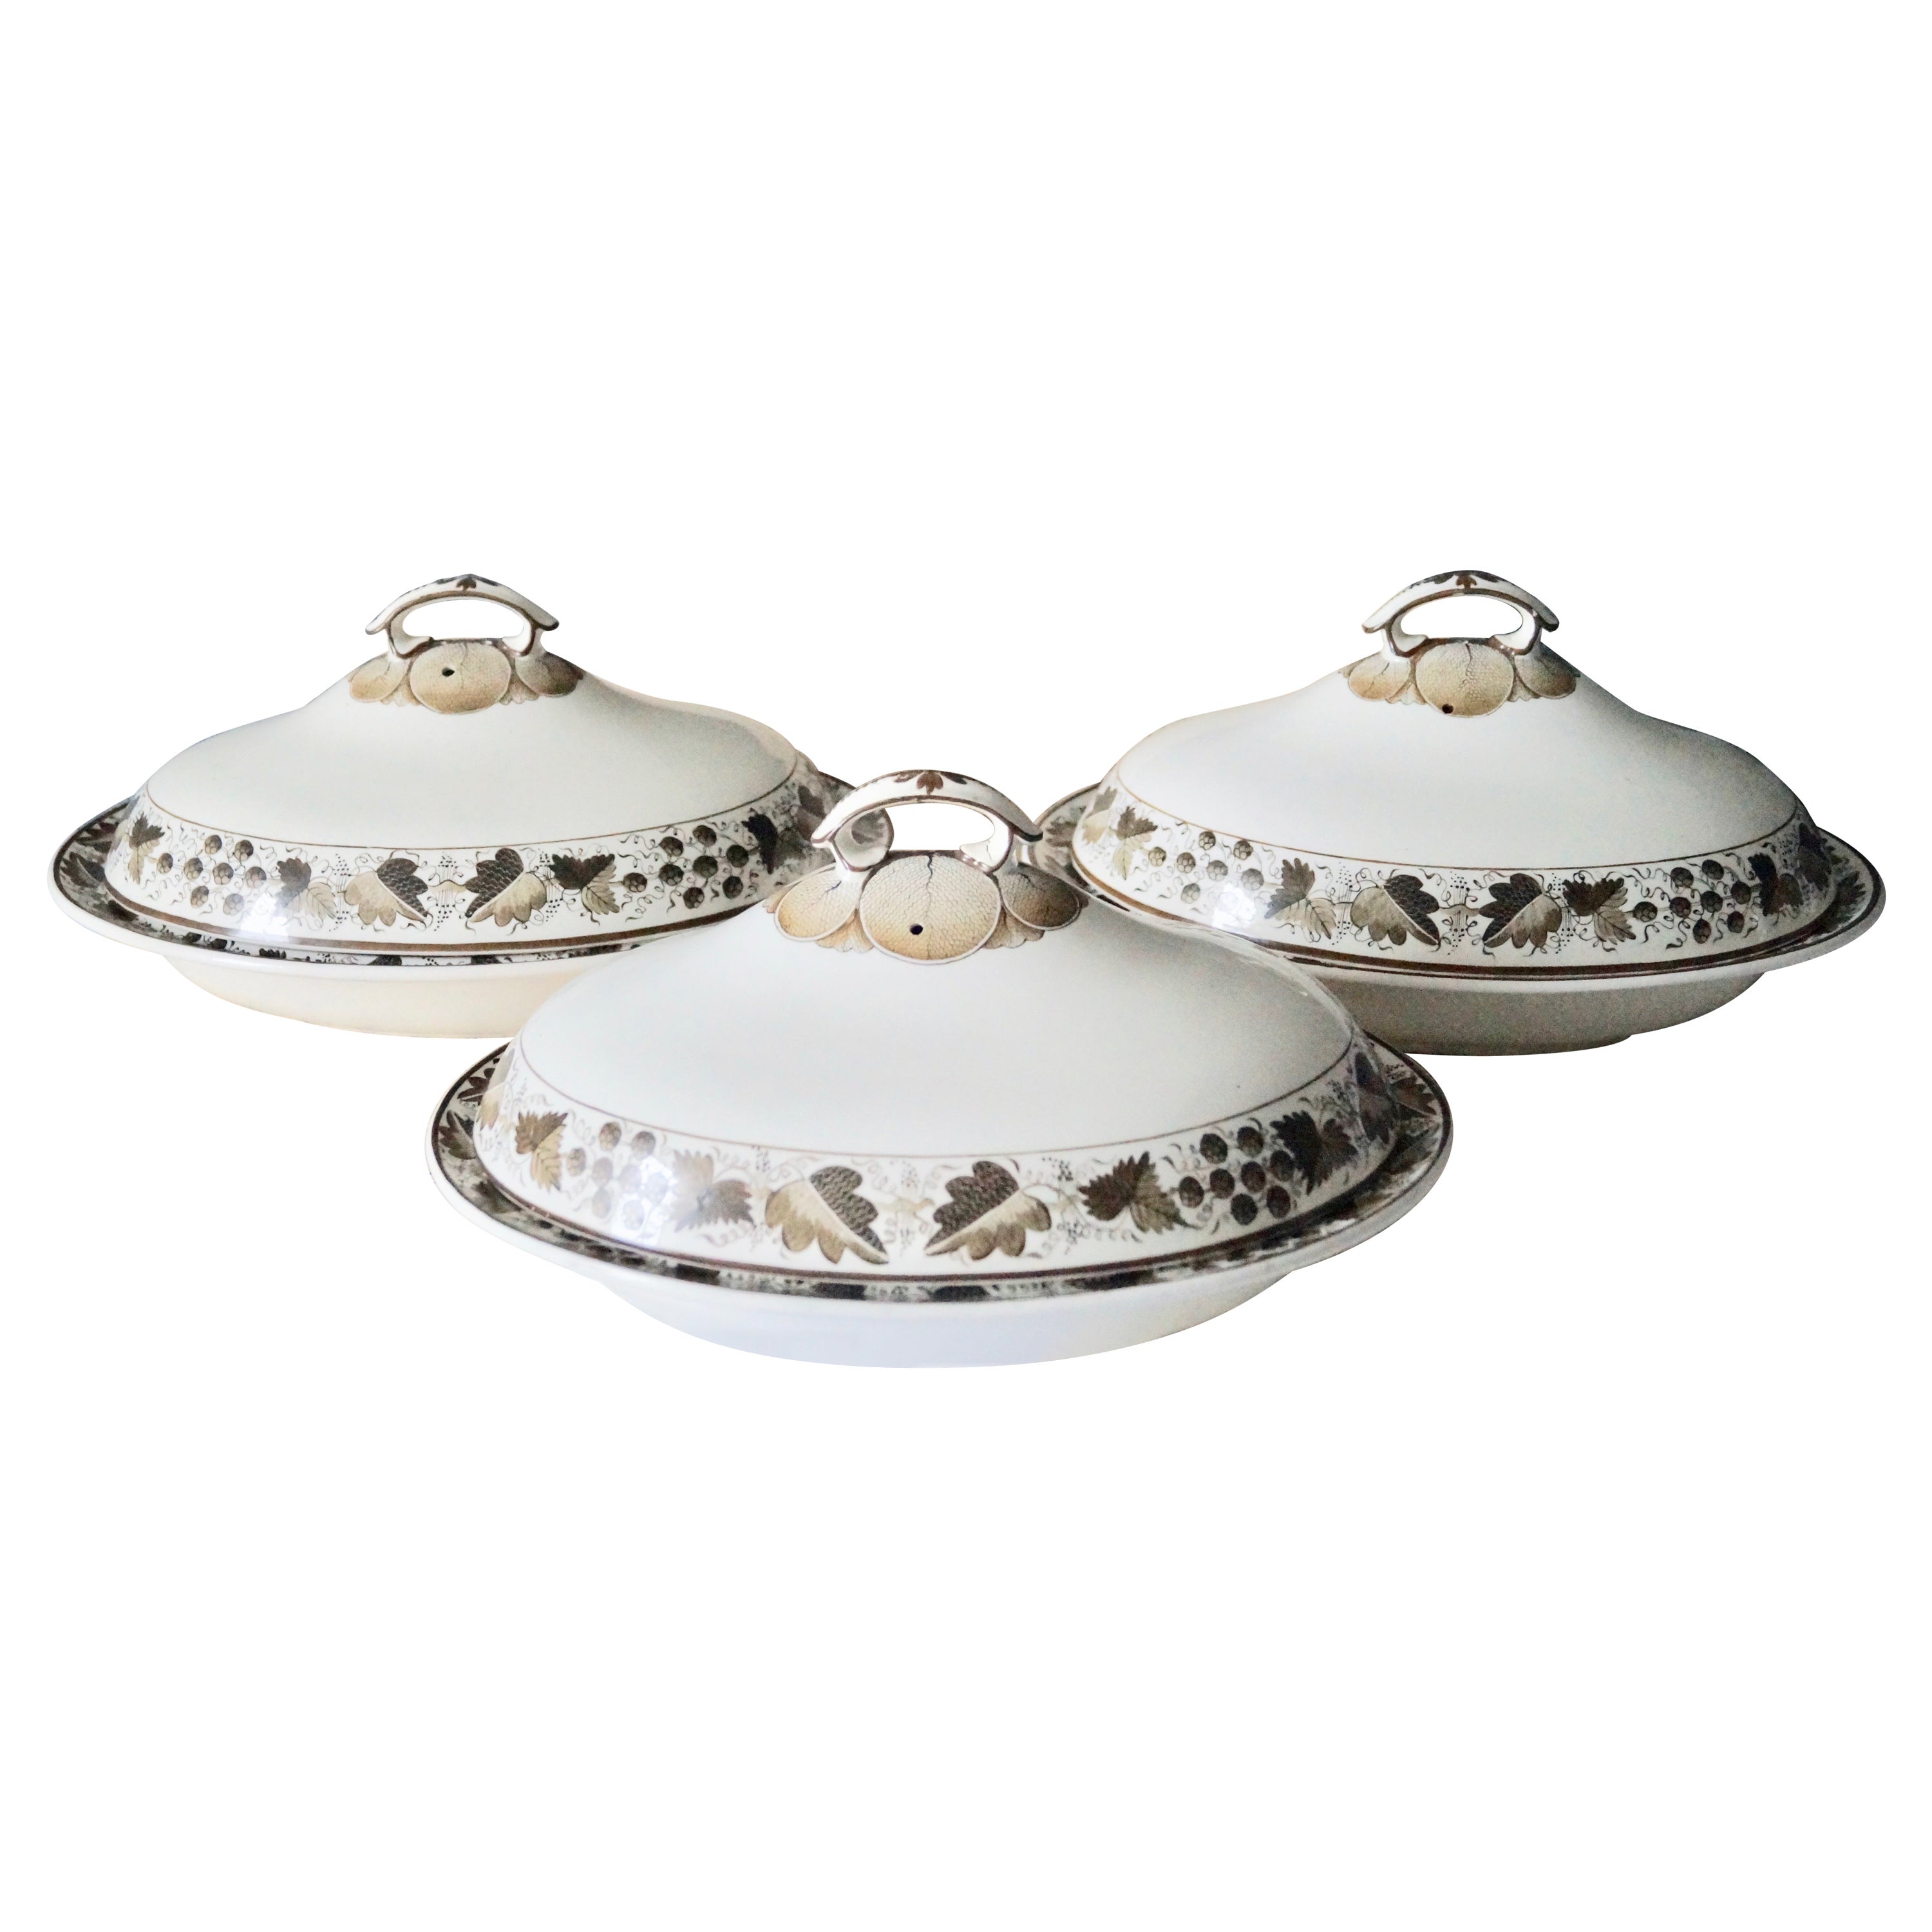 Three Beautiful Rare Antique Copeland Spode Creamware Vegetable Tureen with Lid  For Sale